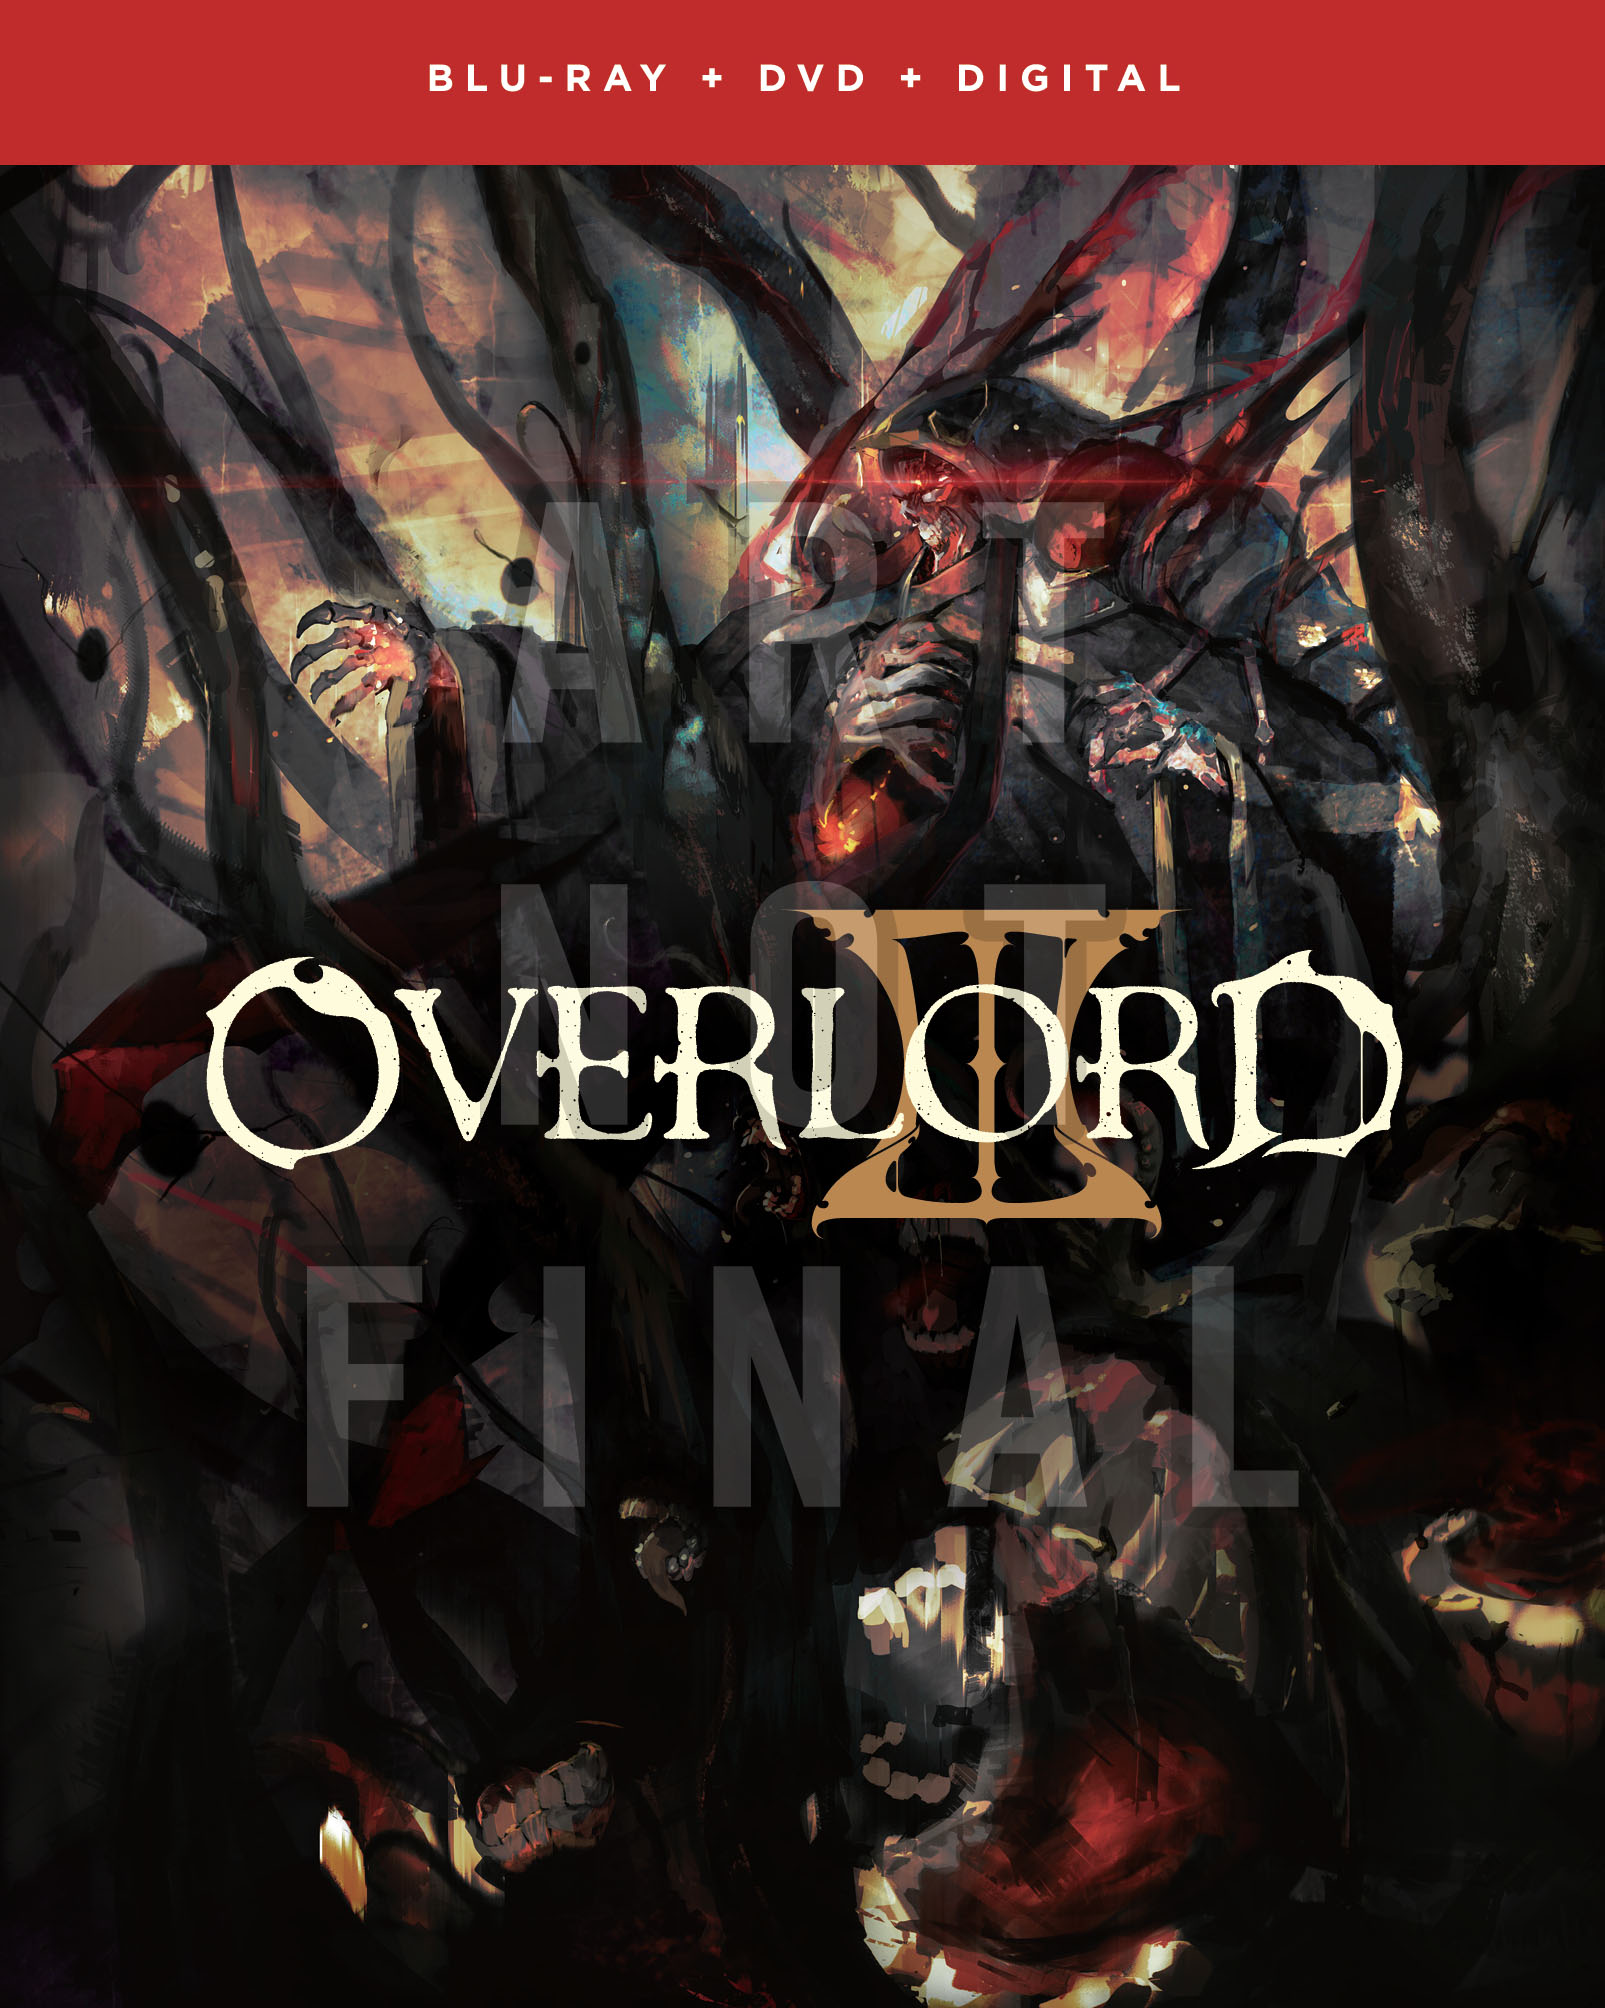 Best Buy: Overlord: The Complete Series [Blu-ray/DVD] [4 Discs]